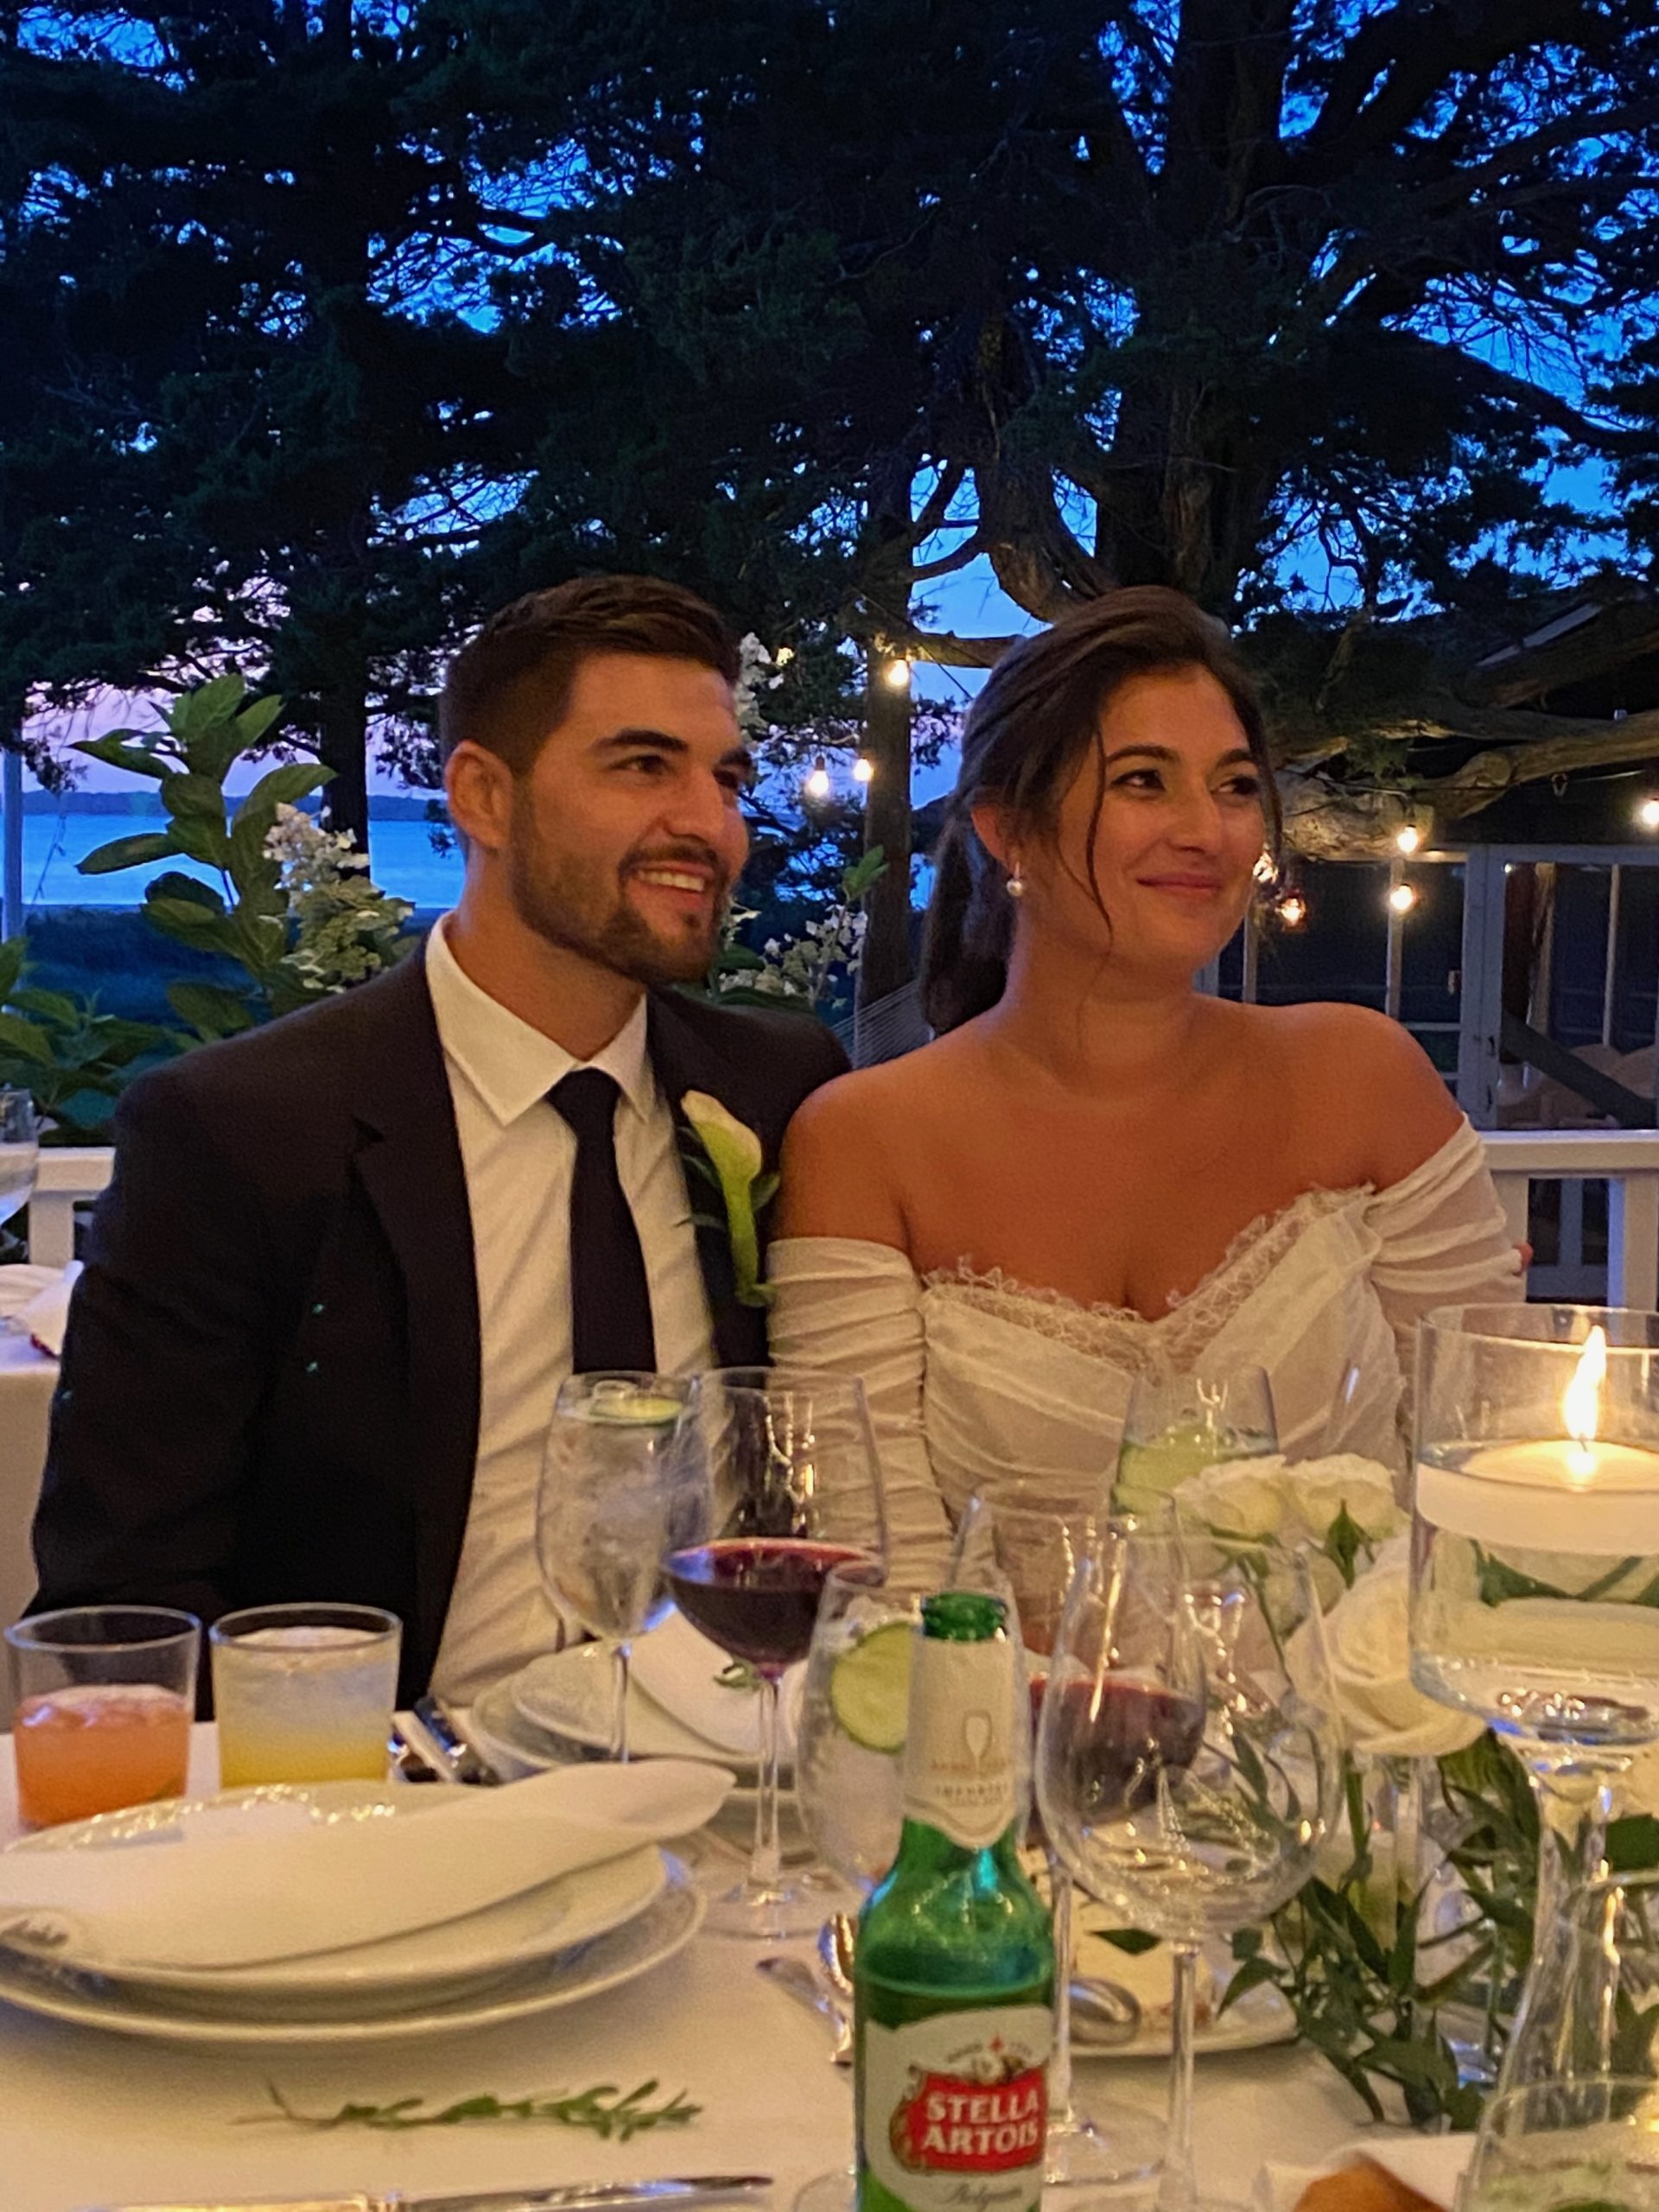 Meaghan Cornacchio and Chase Andreassi both from Southampton were married Sept 12, 2020 at the Basilica Parish of Sacred Hearts if Jesus and Mary. The happy couple will reside in their new home in Southampton. 